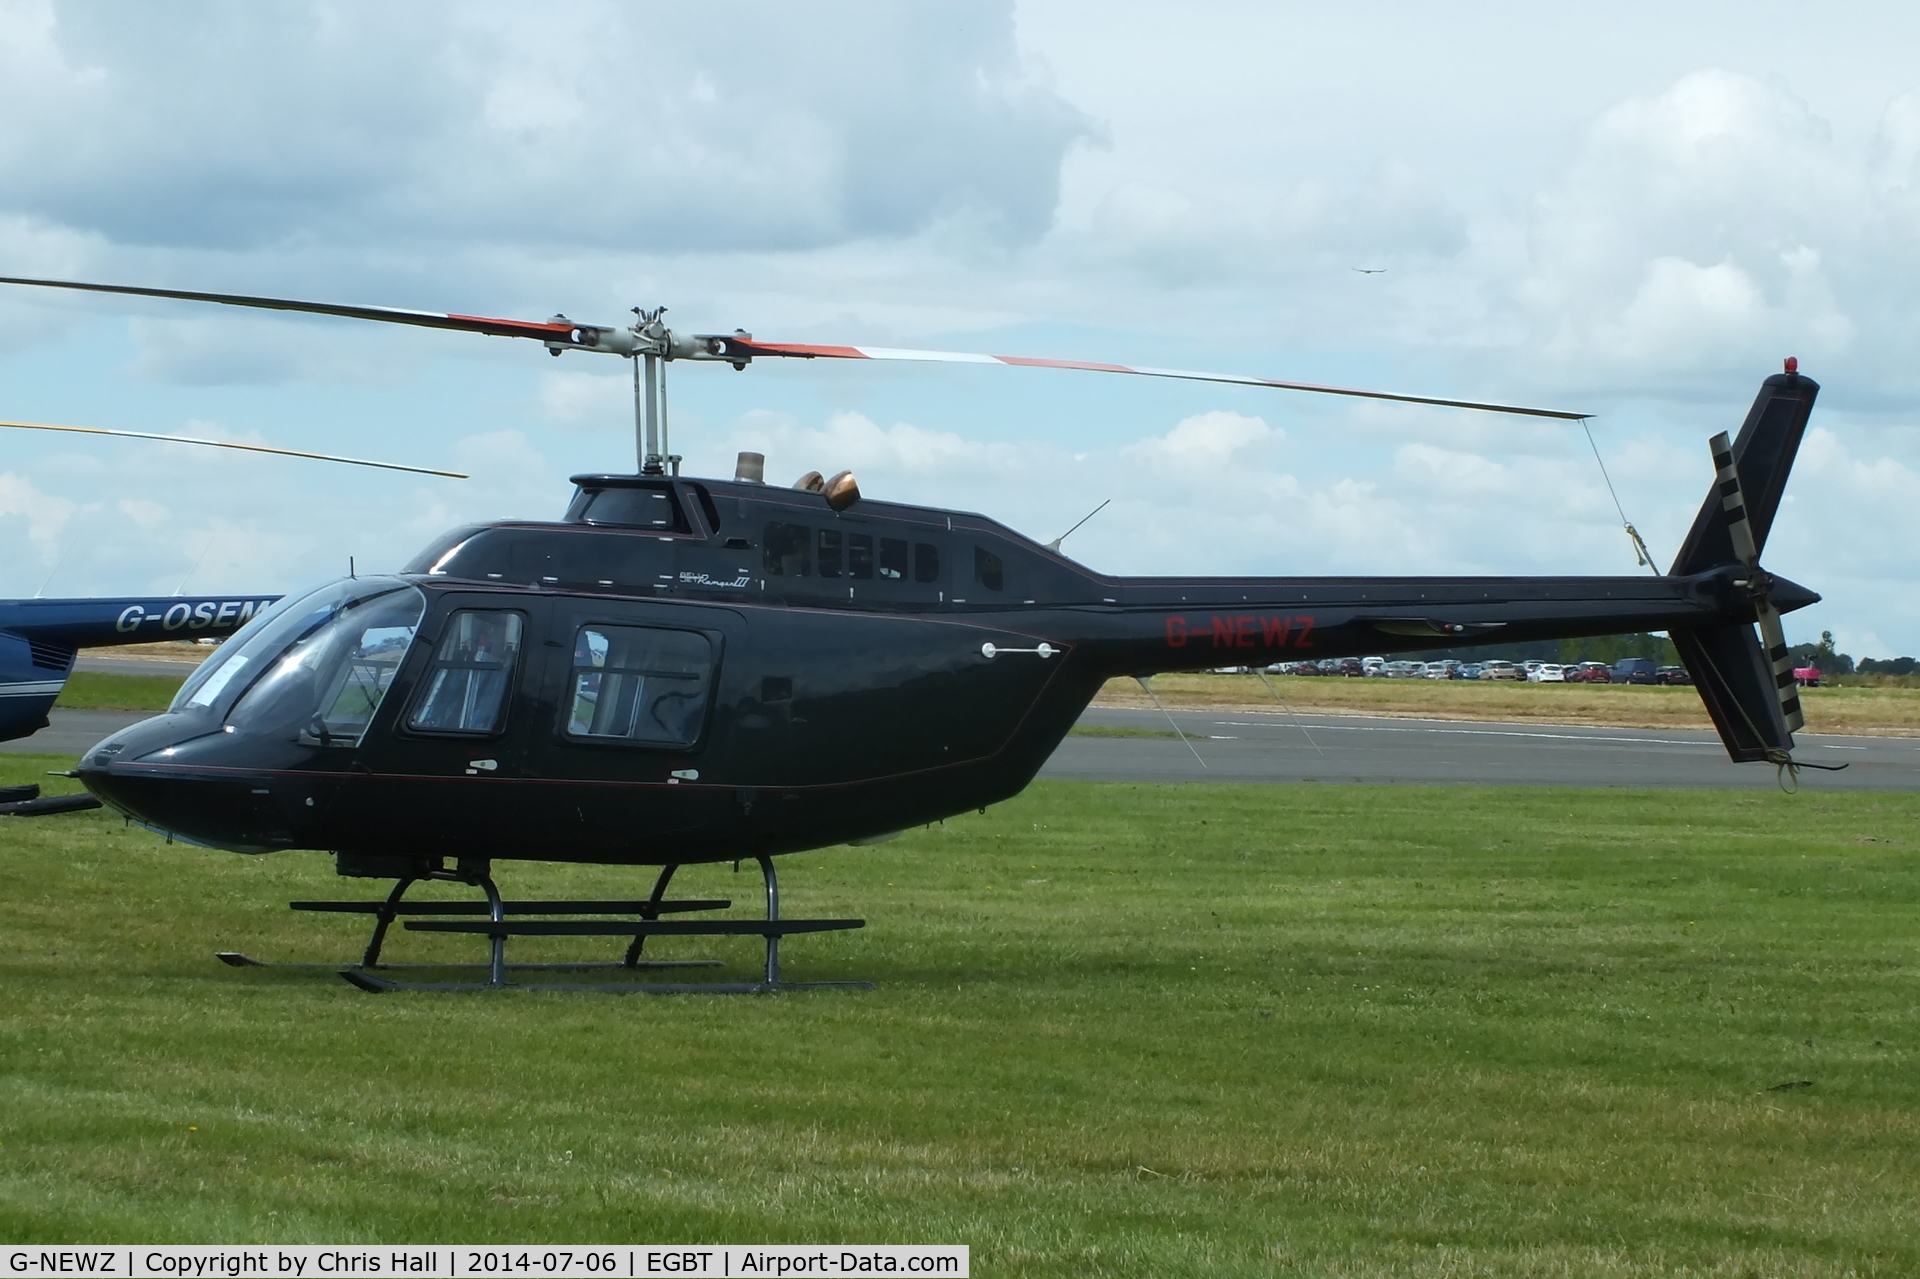 G-NEWZ, 1998 Bell 206B JetRanger III C/N 4475, ferrying race fans to the British F1 Grand Prix at Silverstone